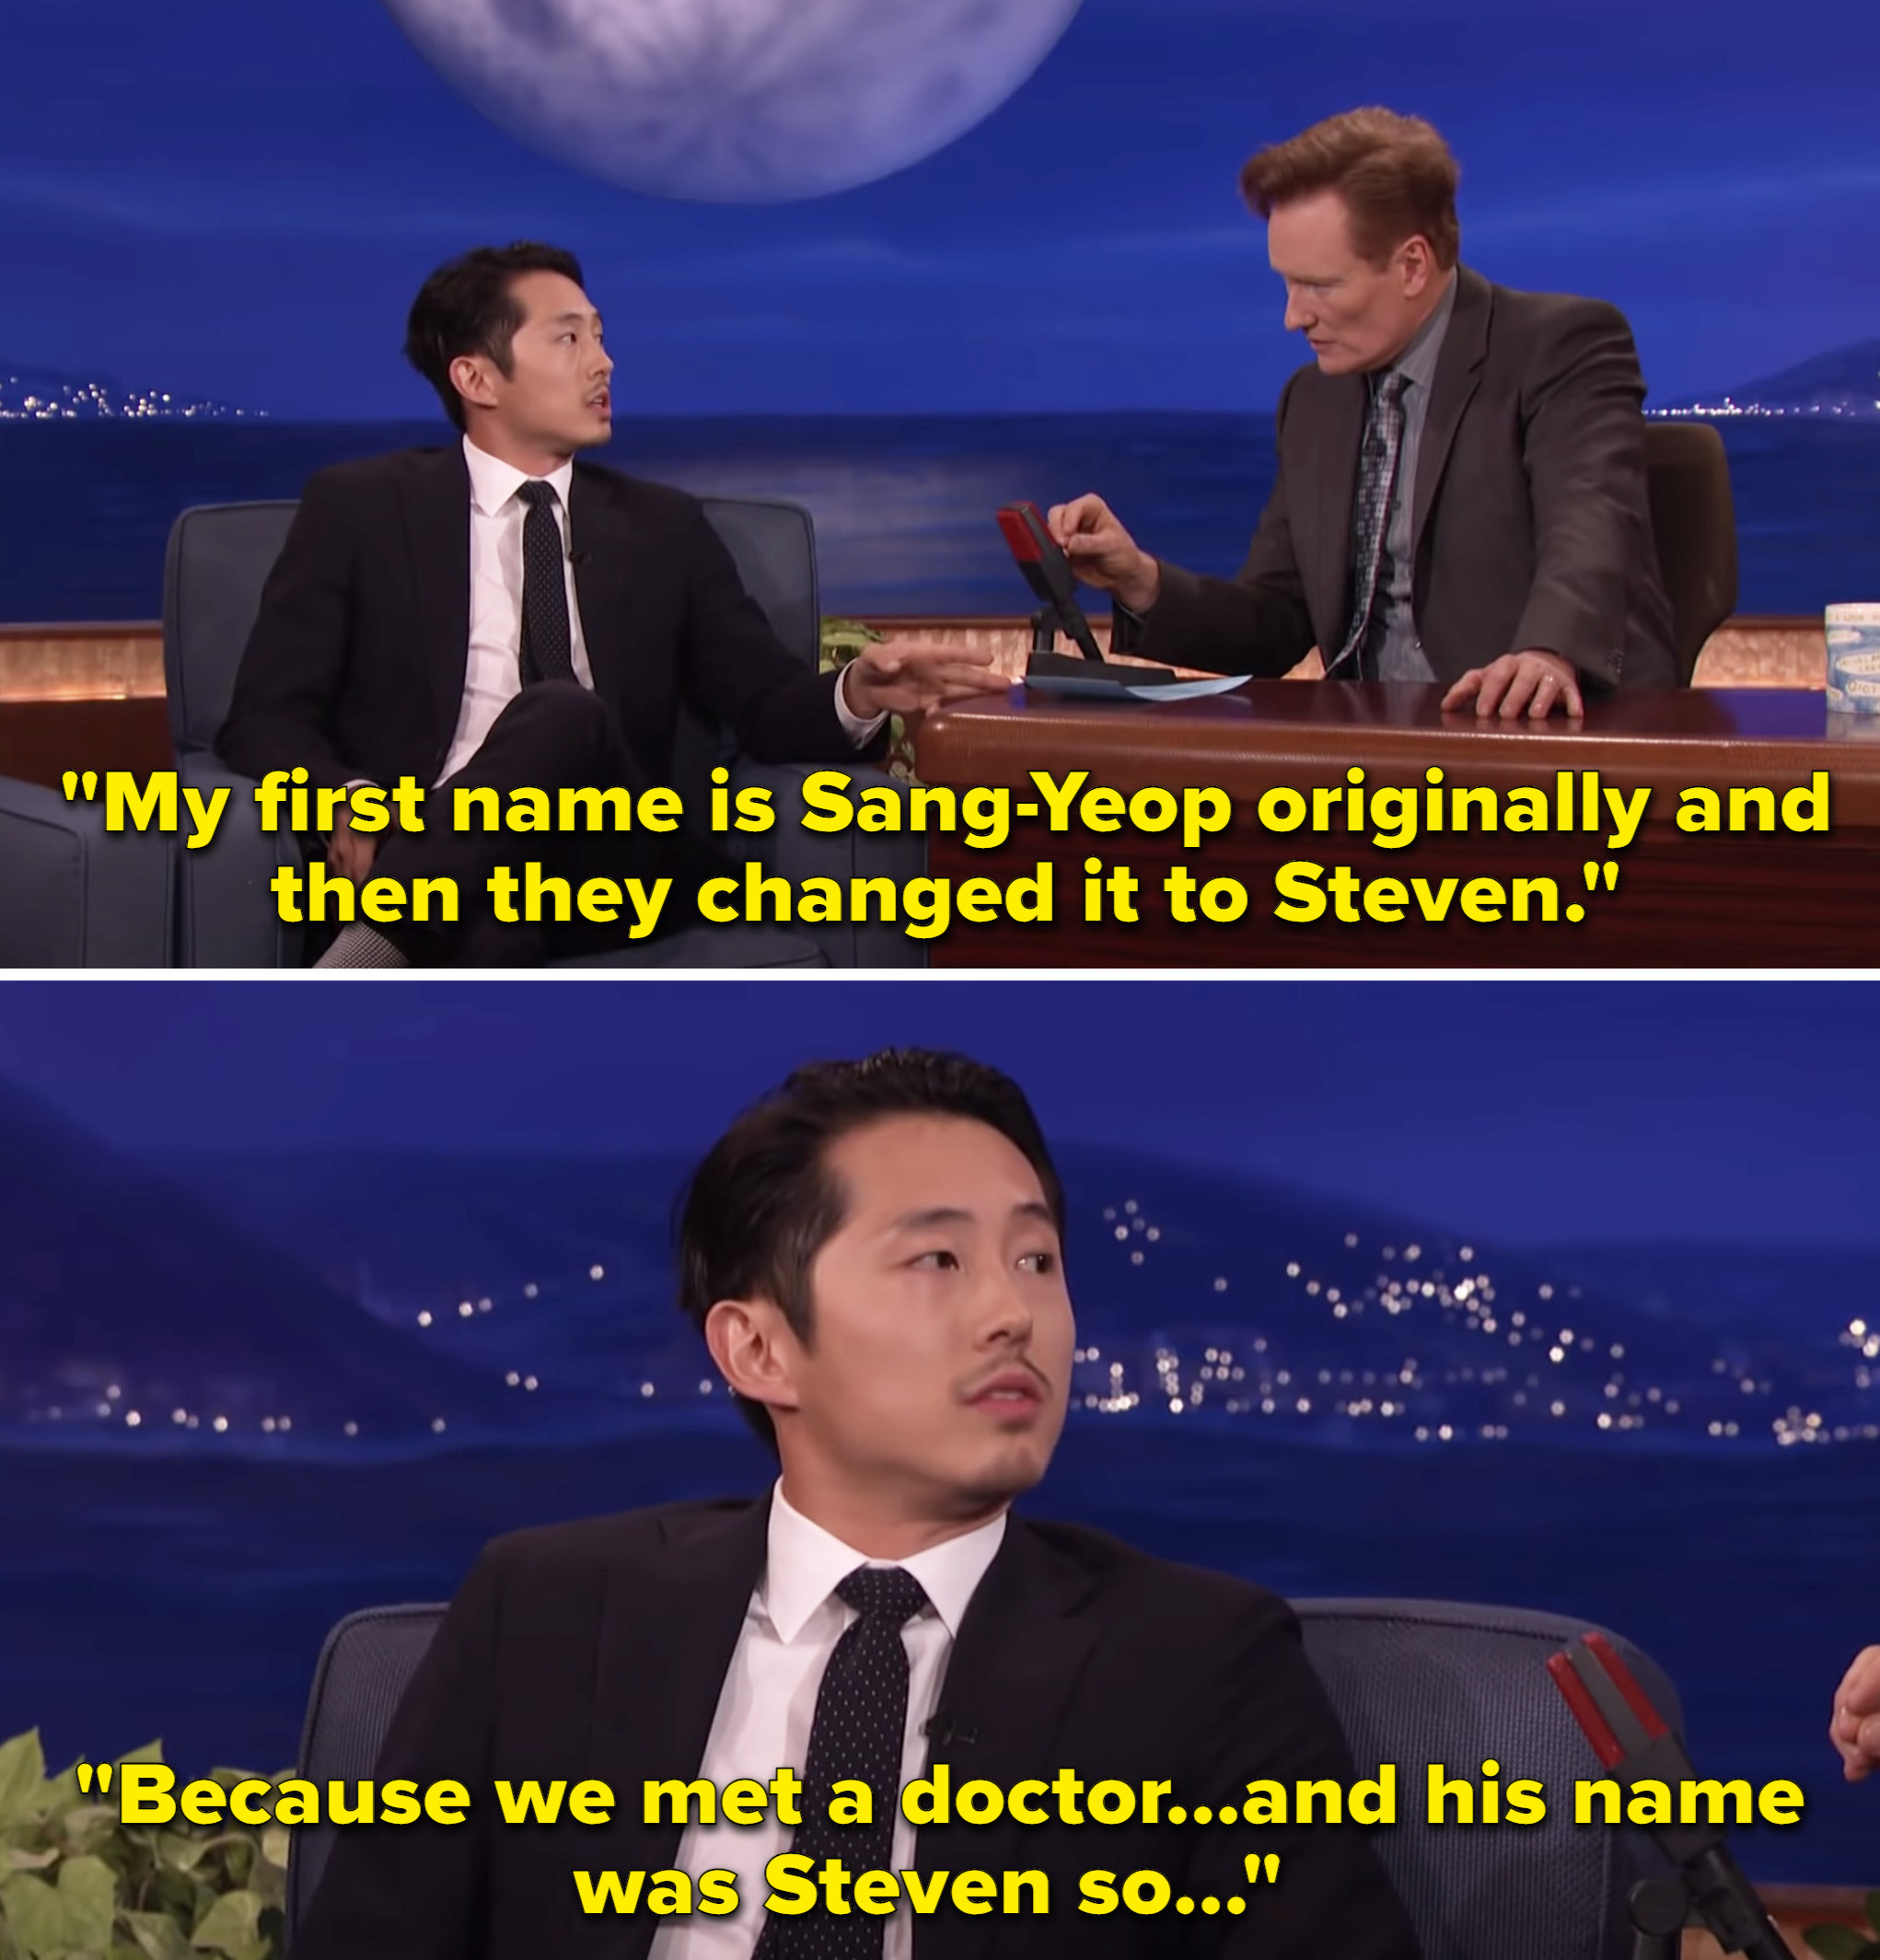 Steven saying his parents chose the name &quot;Steven&quot; because &quot;we met a doctor&quot;